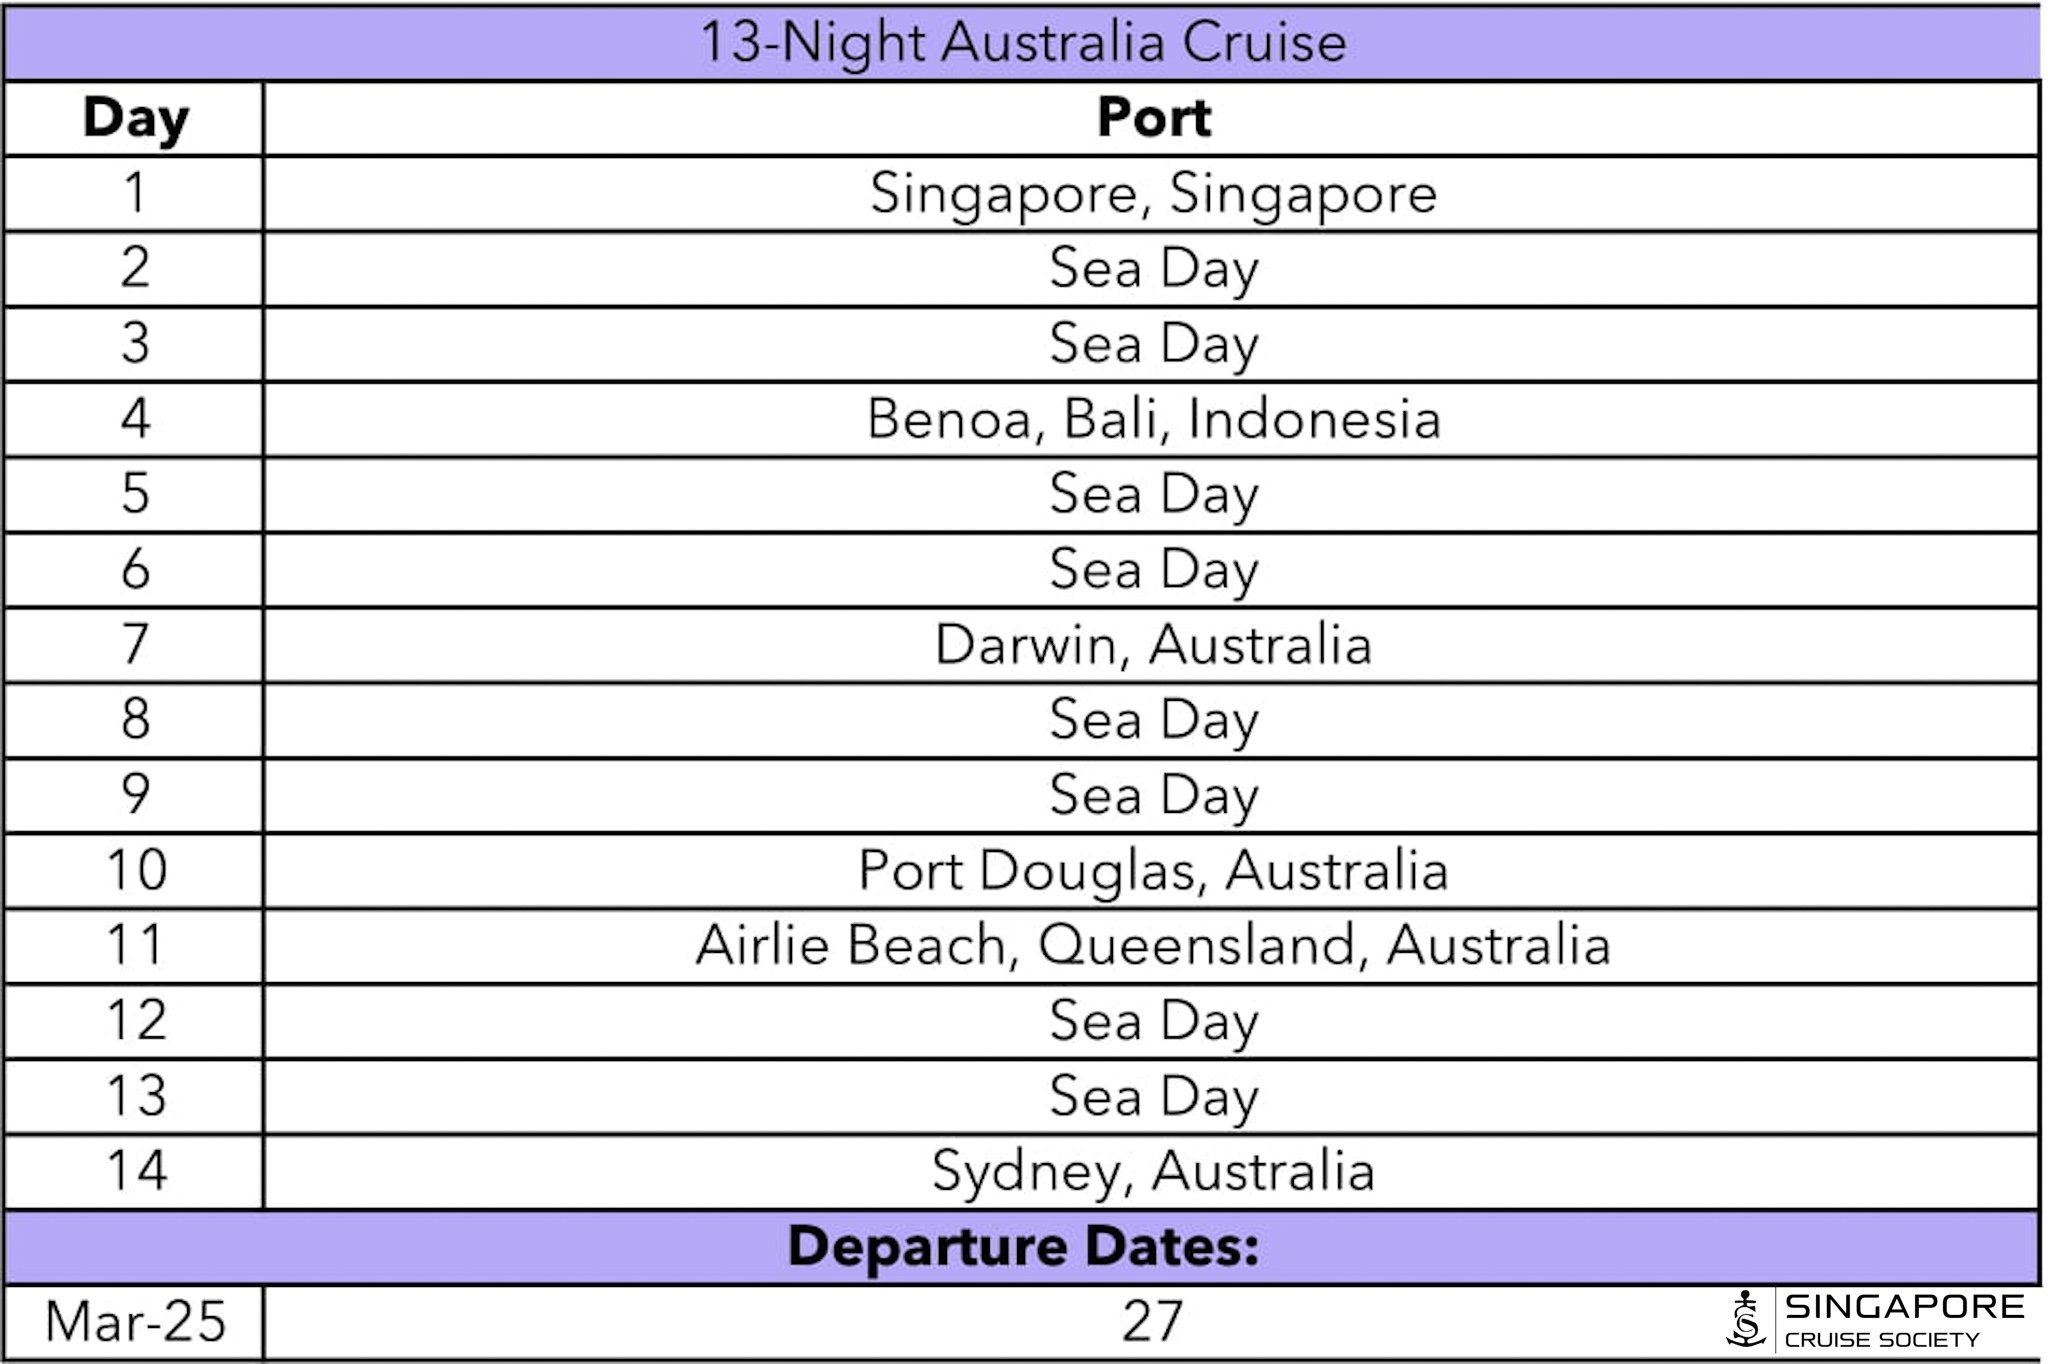  The Singapore to Sydney voyage will not stop in Cairns and Brisbane. The ship will visit Port Douglas instead.  There are also no overnight stays in Benoa, Bali.    PHOTO: SINGAPORE CRUISE SOCIETY  